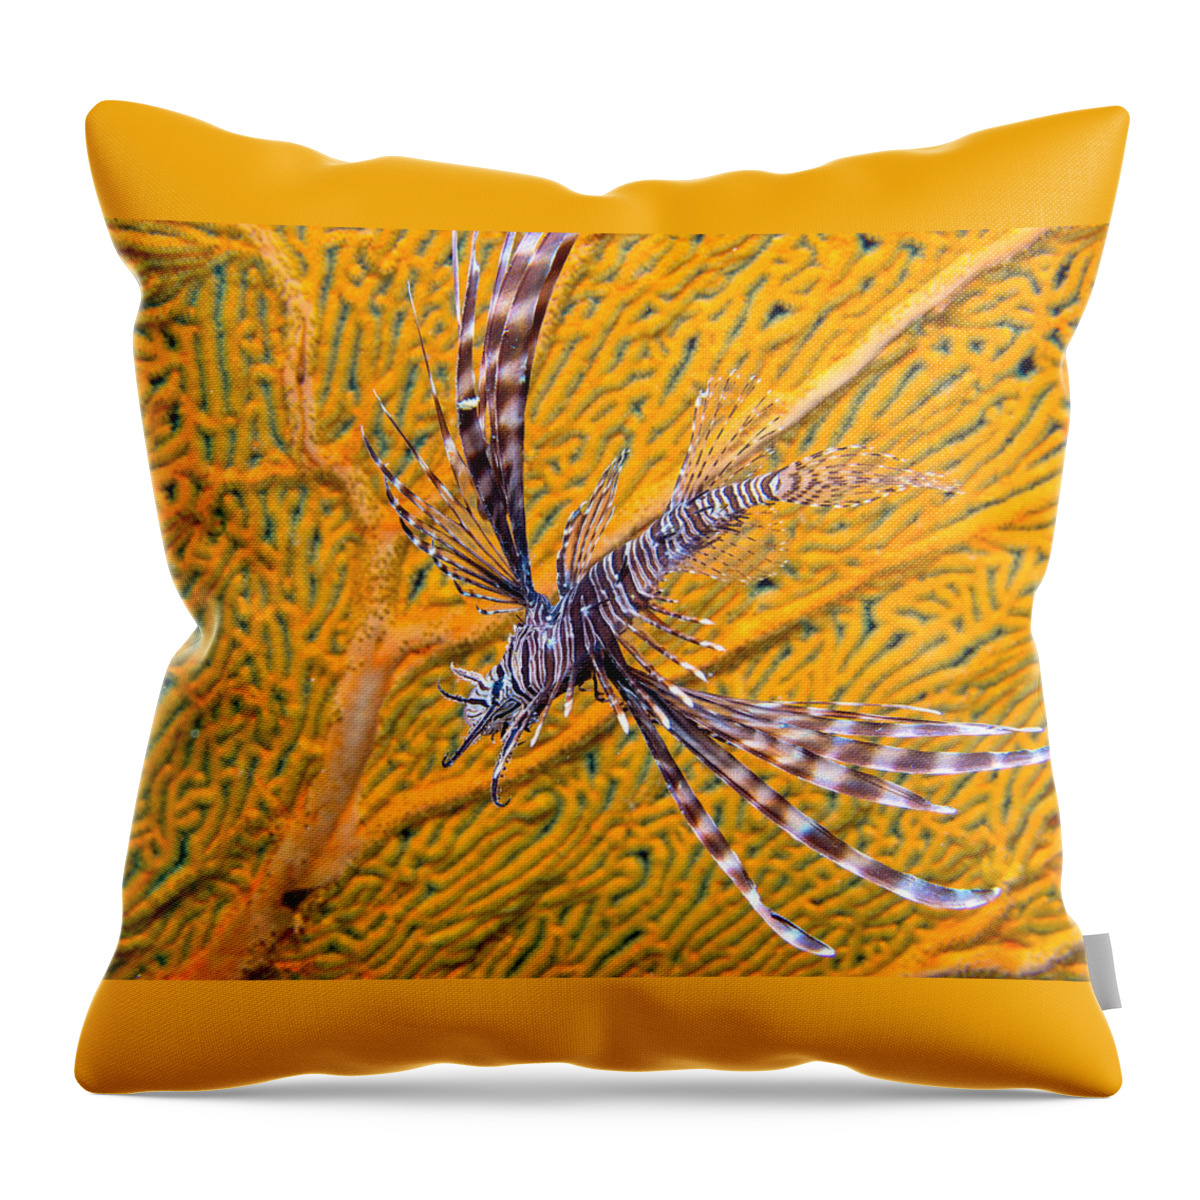 Nature Throw Pillow featuring the photograph Lionfish Against Yellow Fan Coral by Gary Hughes